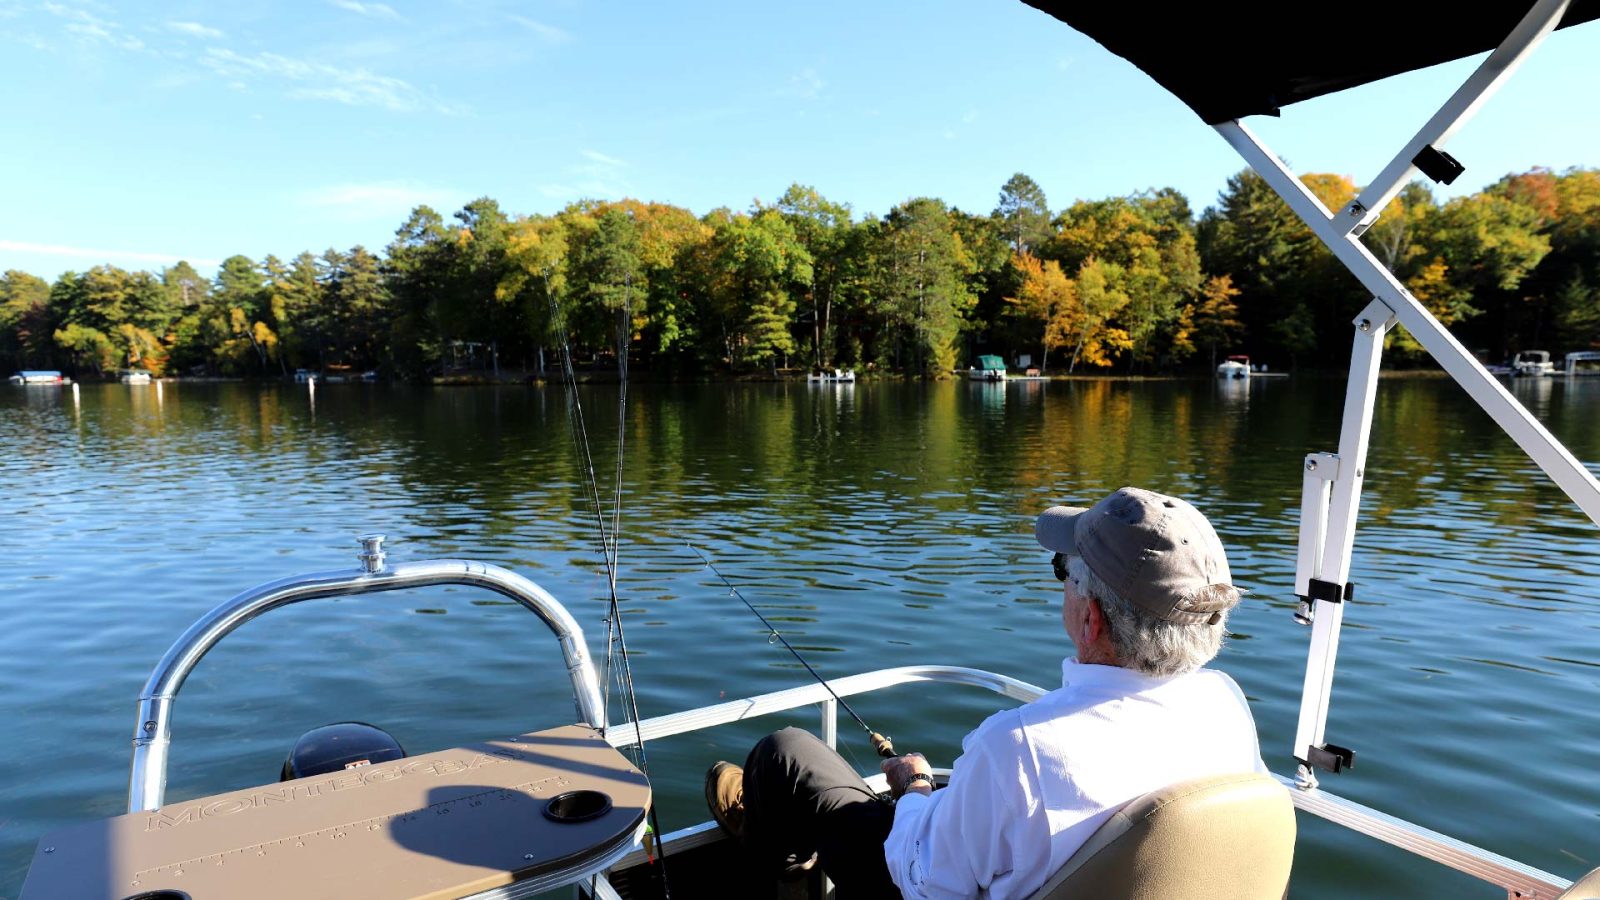 A sunny fall day of boating and fishing on Little St. Germain Lake in Vilas County, Wisconsin.